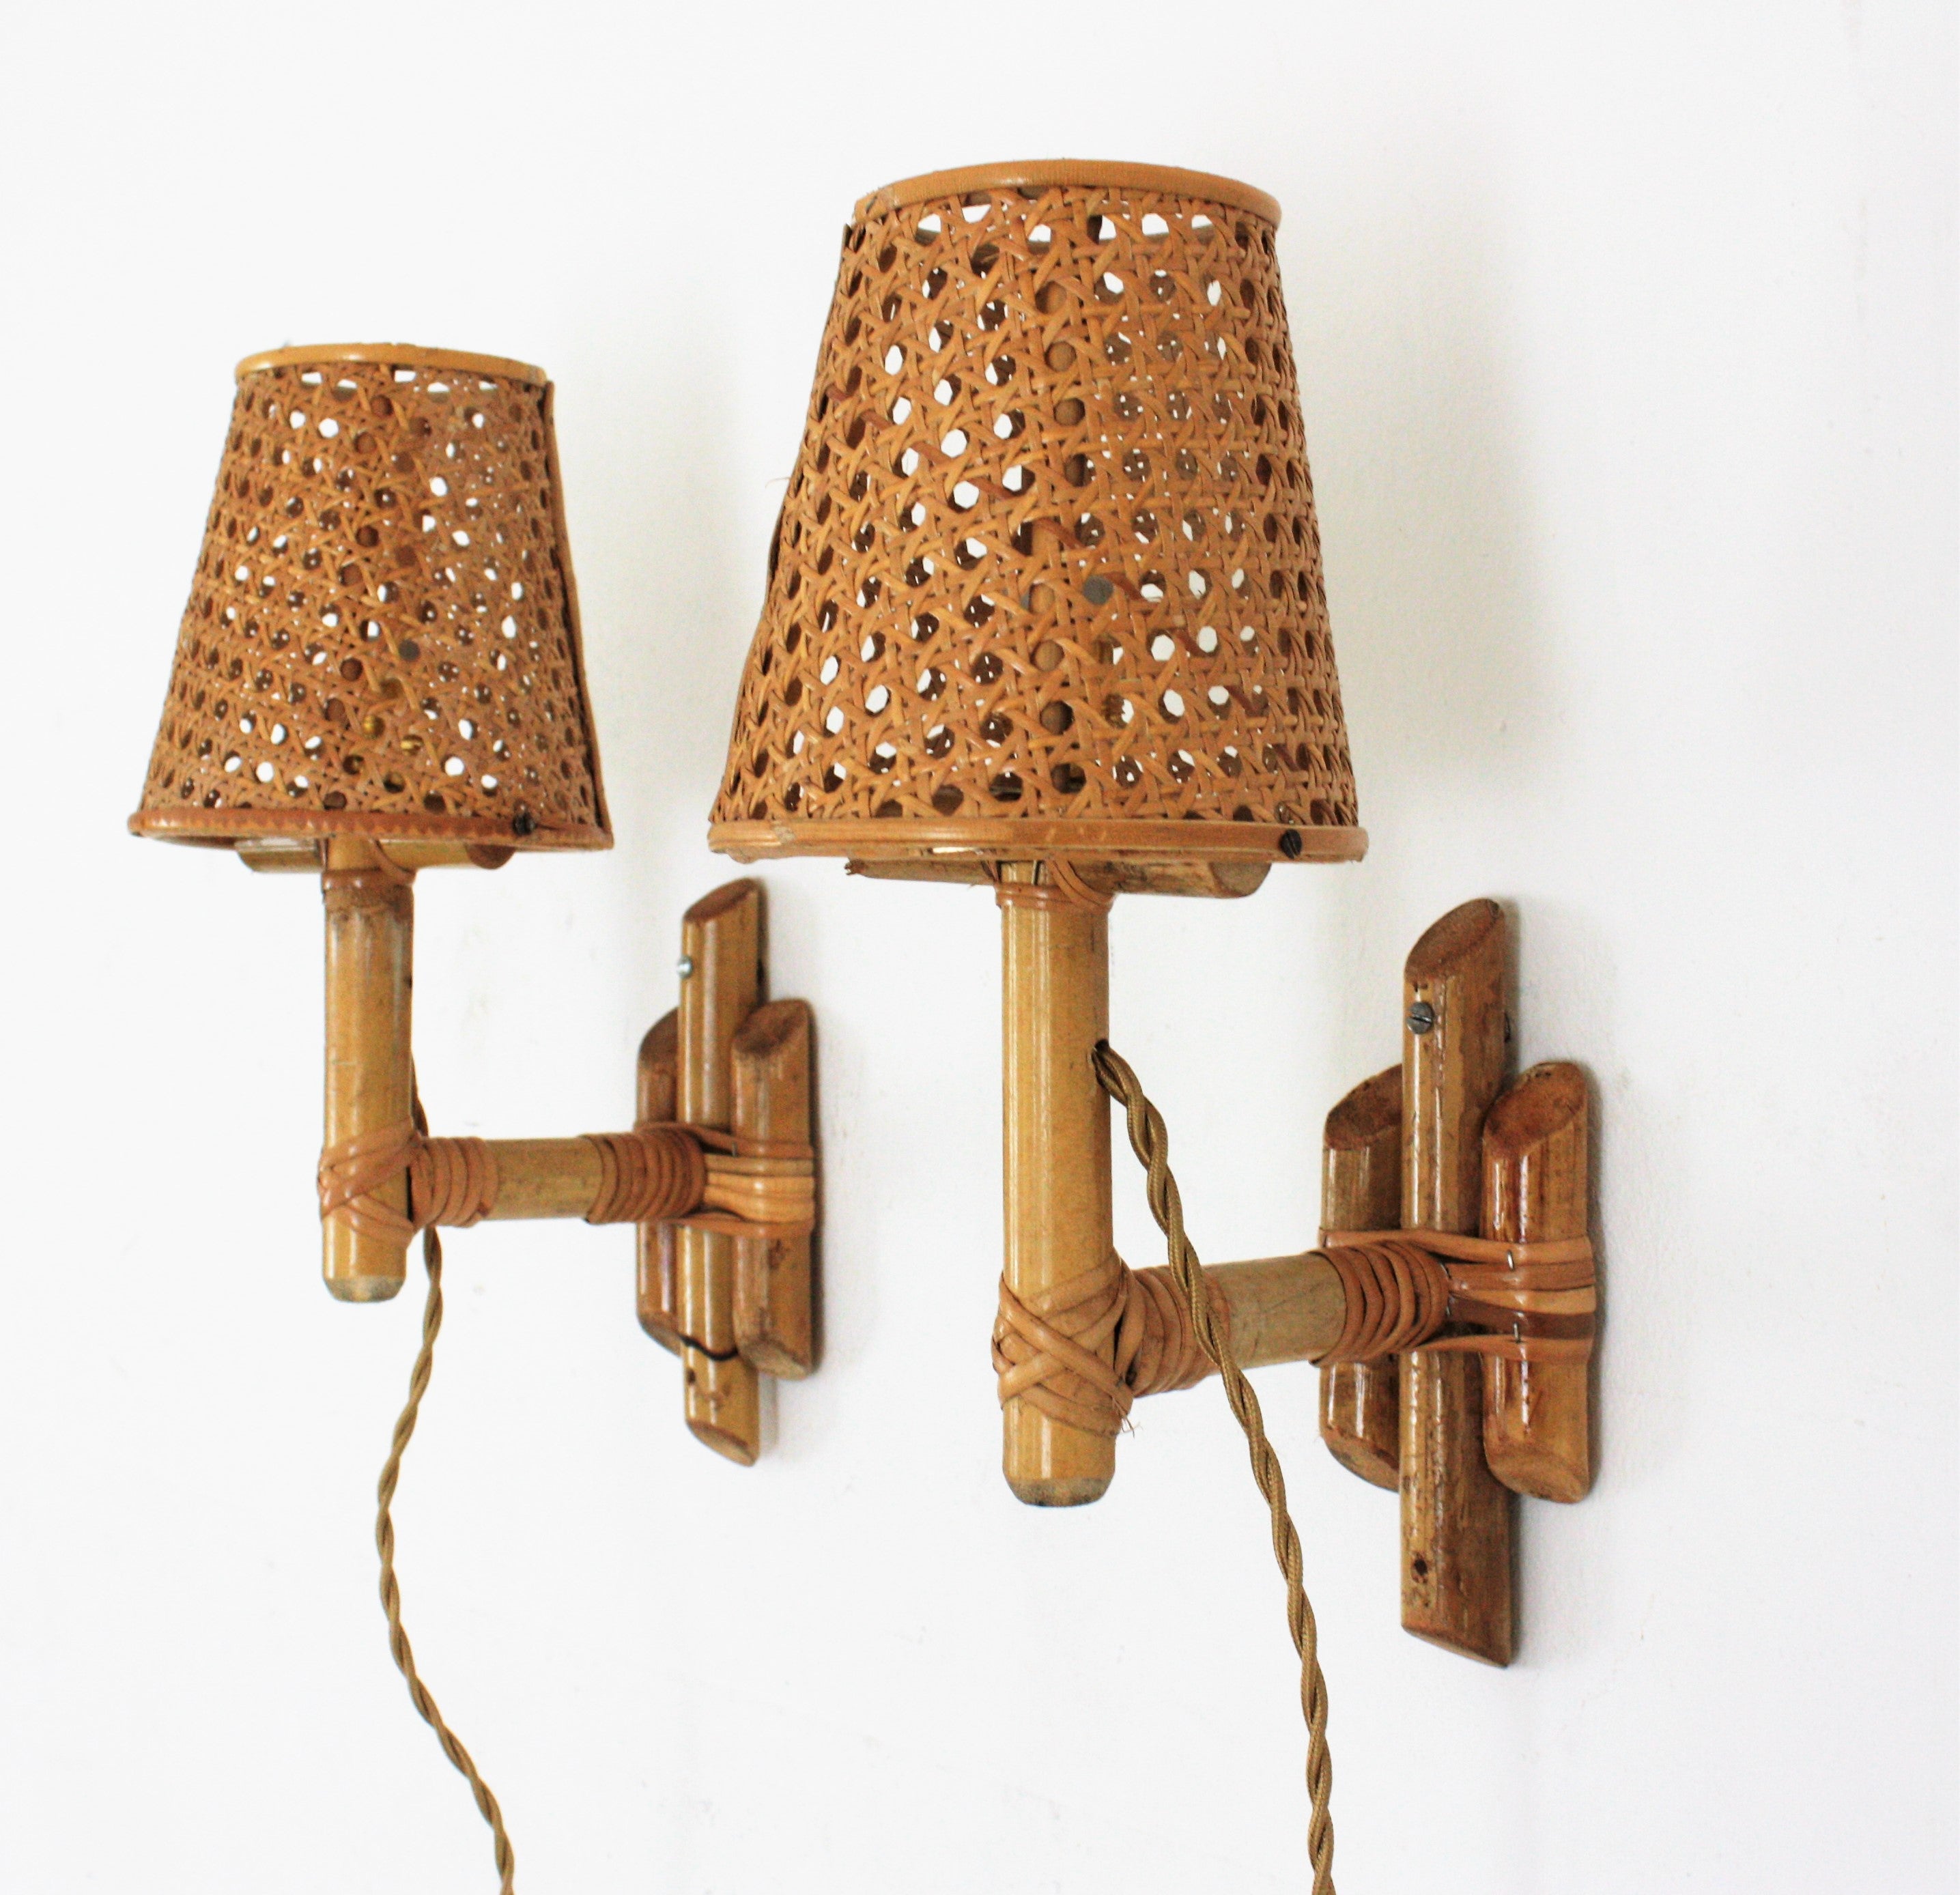 Eye-catching pair of Mid-Century Modern bamboo wall sconces with wicker weave lampshades, Italy, 1960s.
These midcentury wall lights feature backplates made of bamboo canes holding bamboo arms with conical wicker wire lampshades.
They will be the